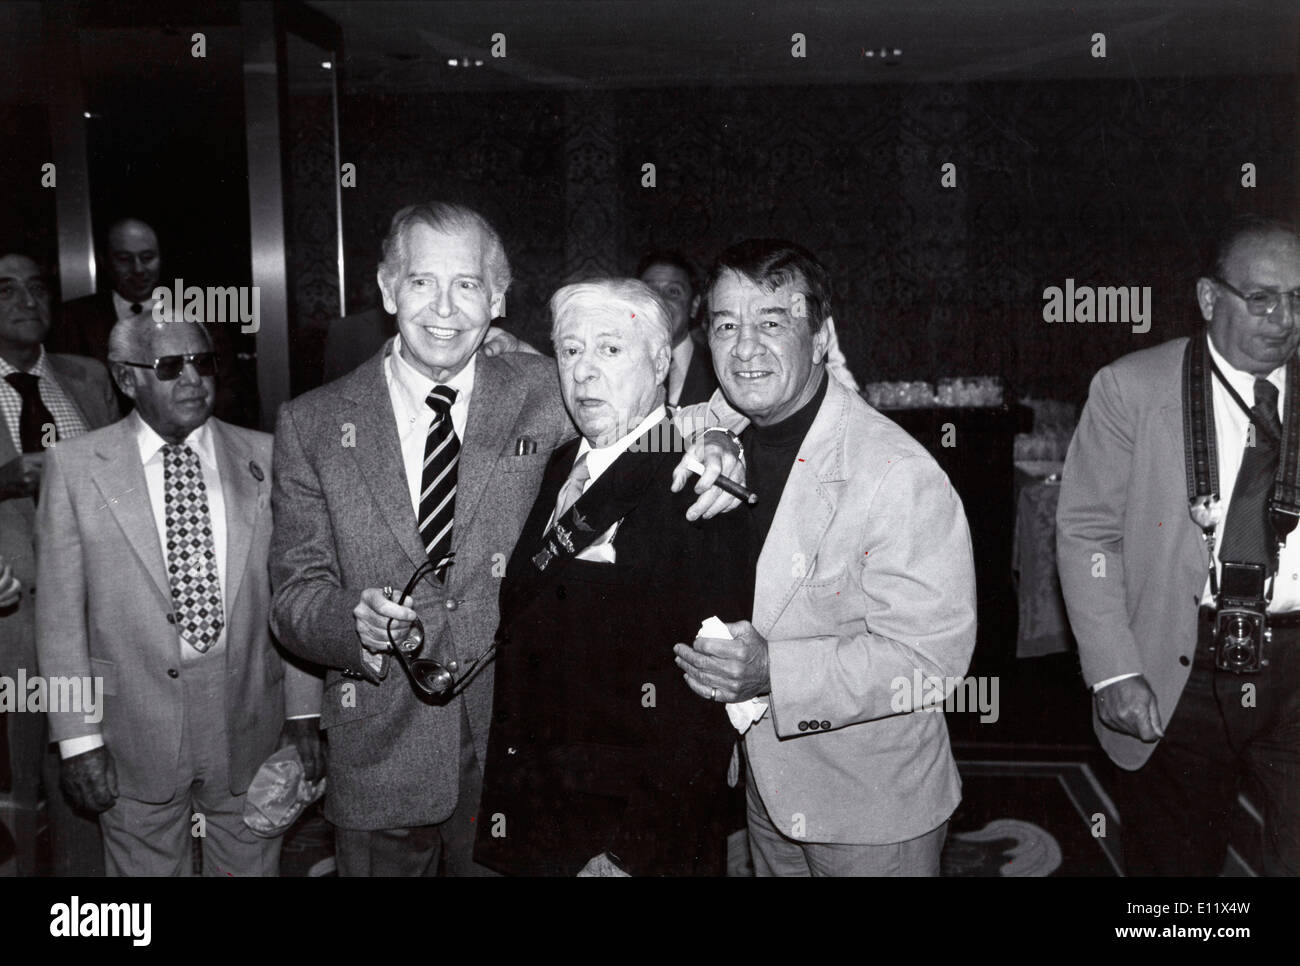 Jun 25, 1980; New York, NY, USA; Actor Mr. MILTON BERLE (L) pictured with some friends at Sheraton Center Hotel in New York. Stock Photo